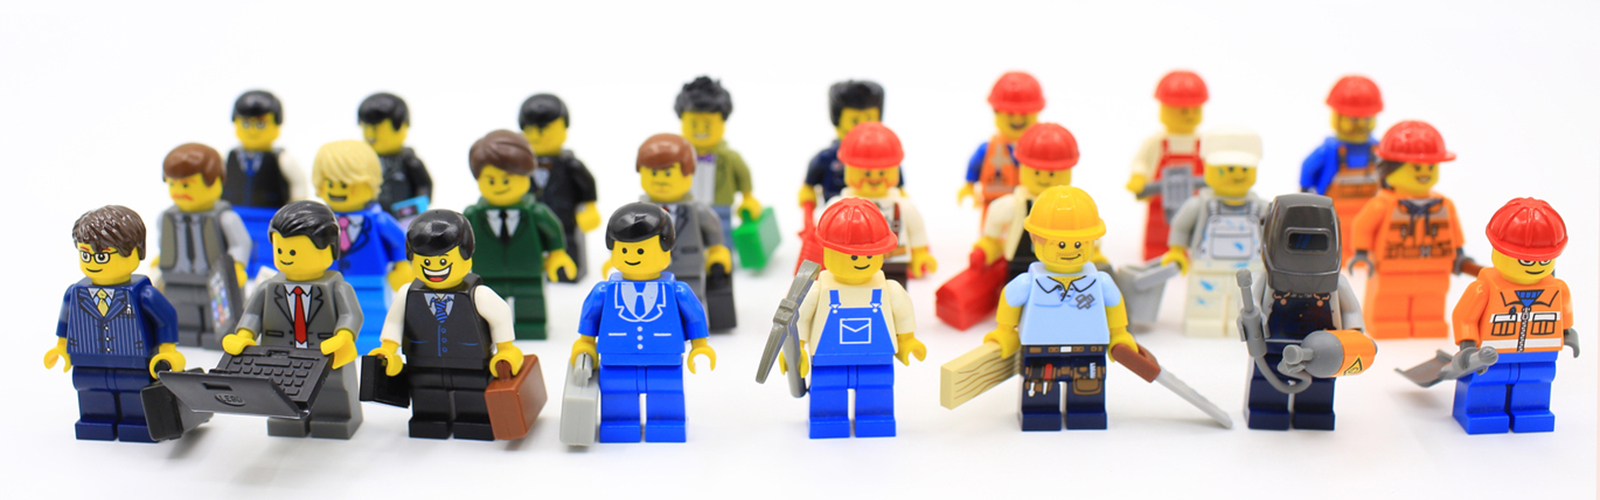 Image: Lego construction workers